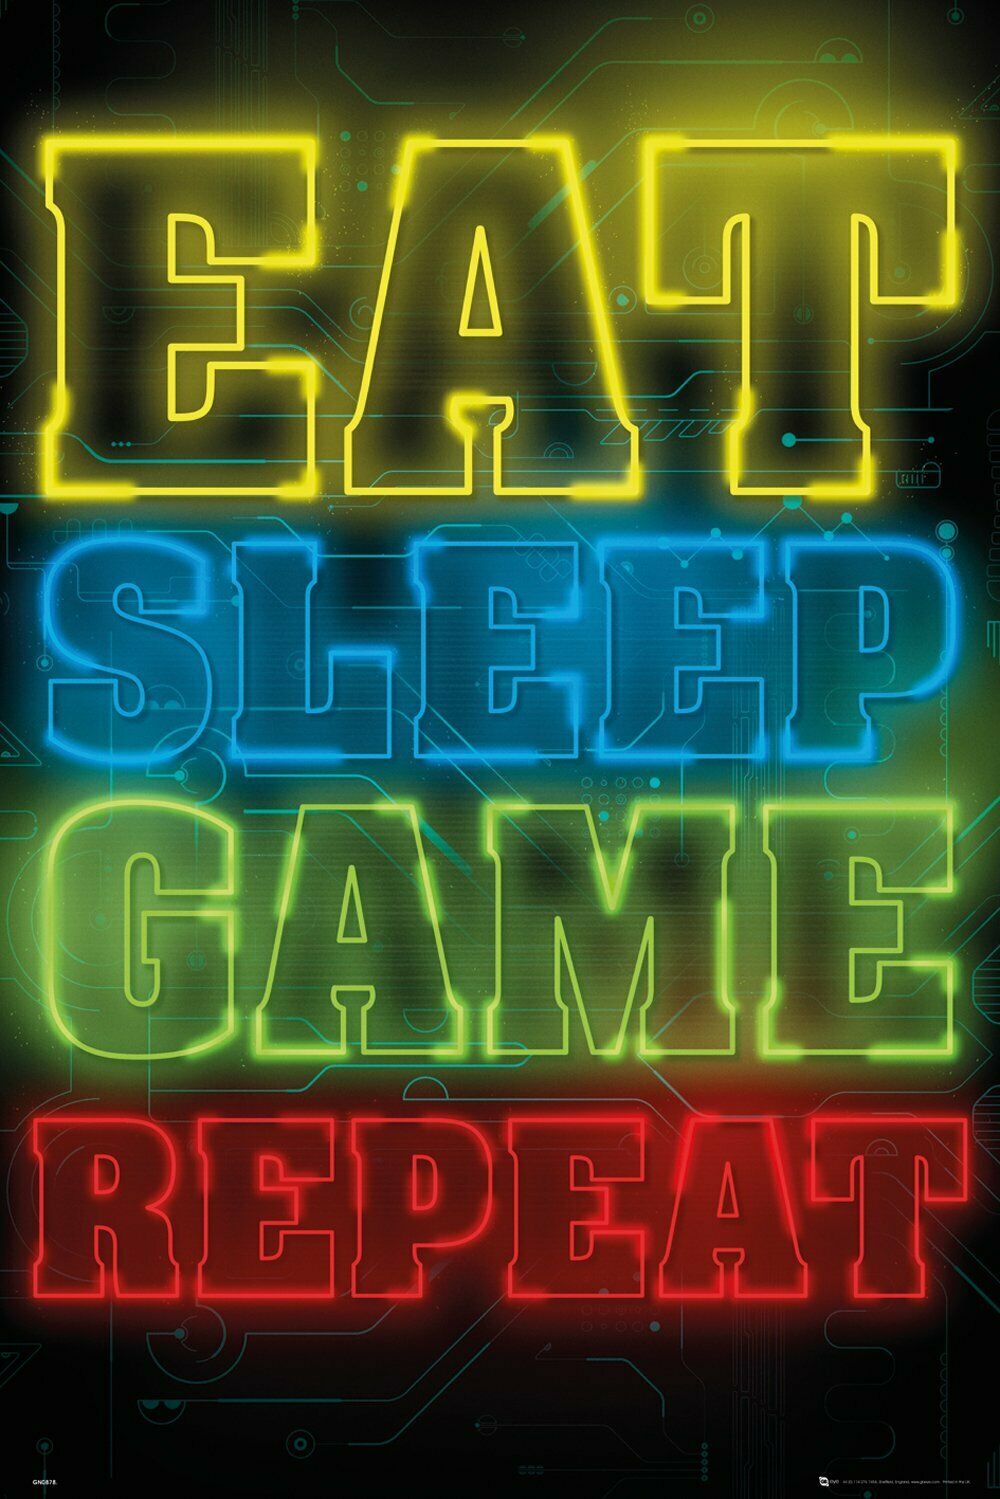 Eat Sleep Game Repeat - Poster.